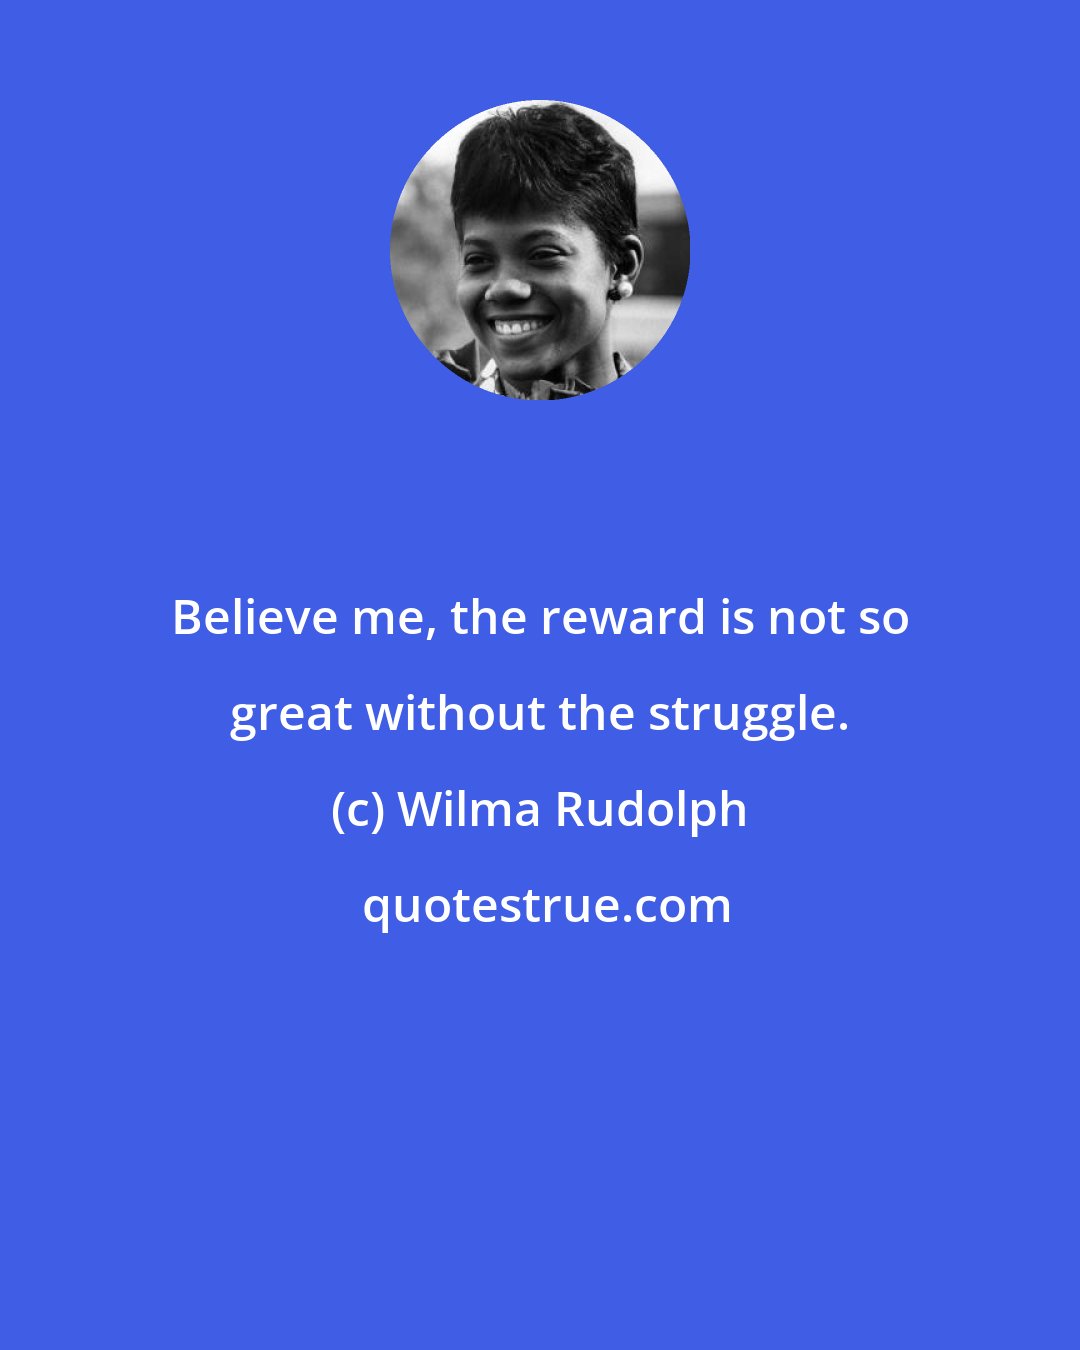 Wilma Rudolph: Believe me, the reward is not so great without the struggle.